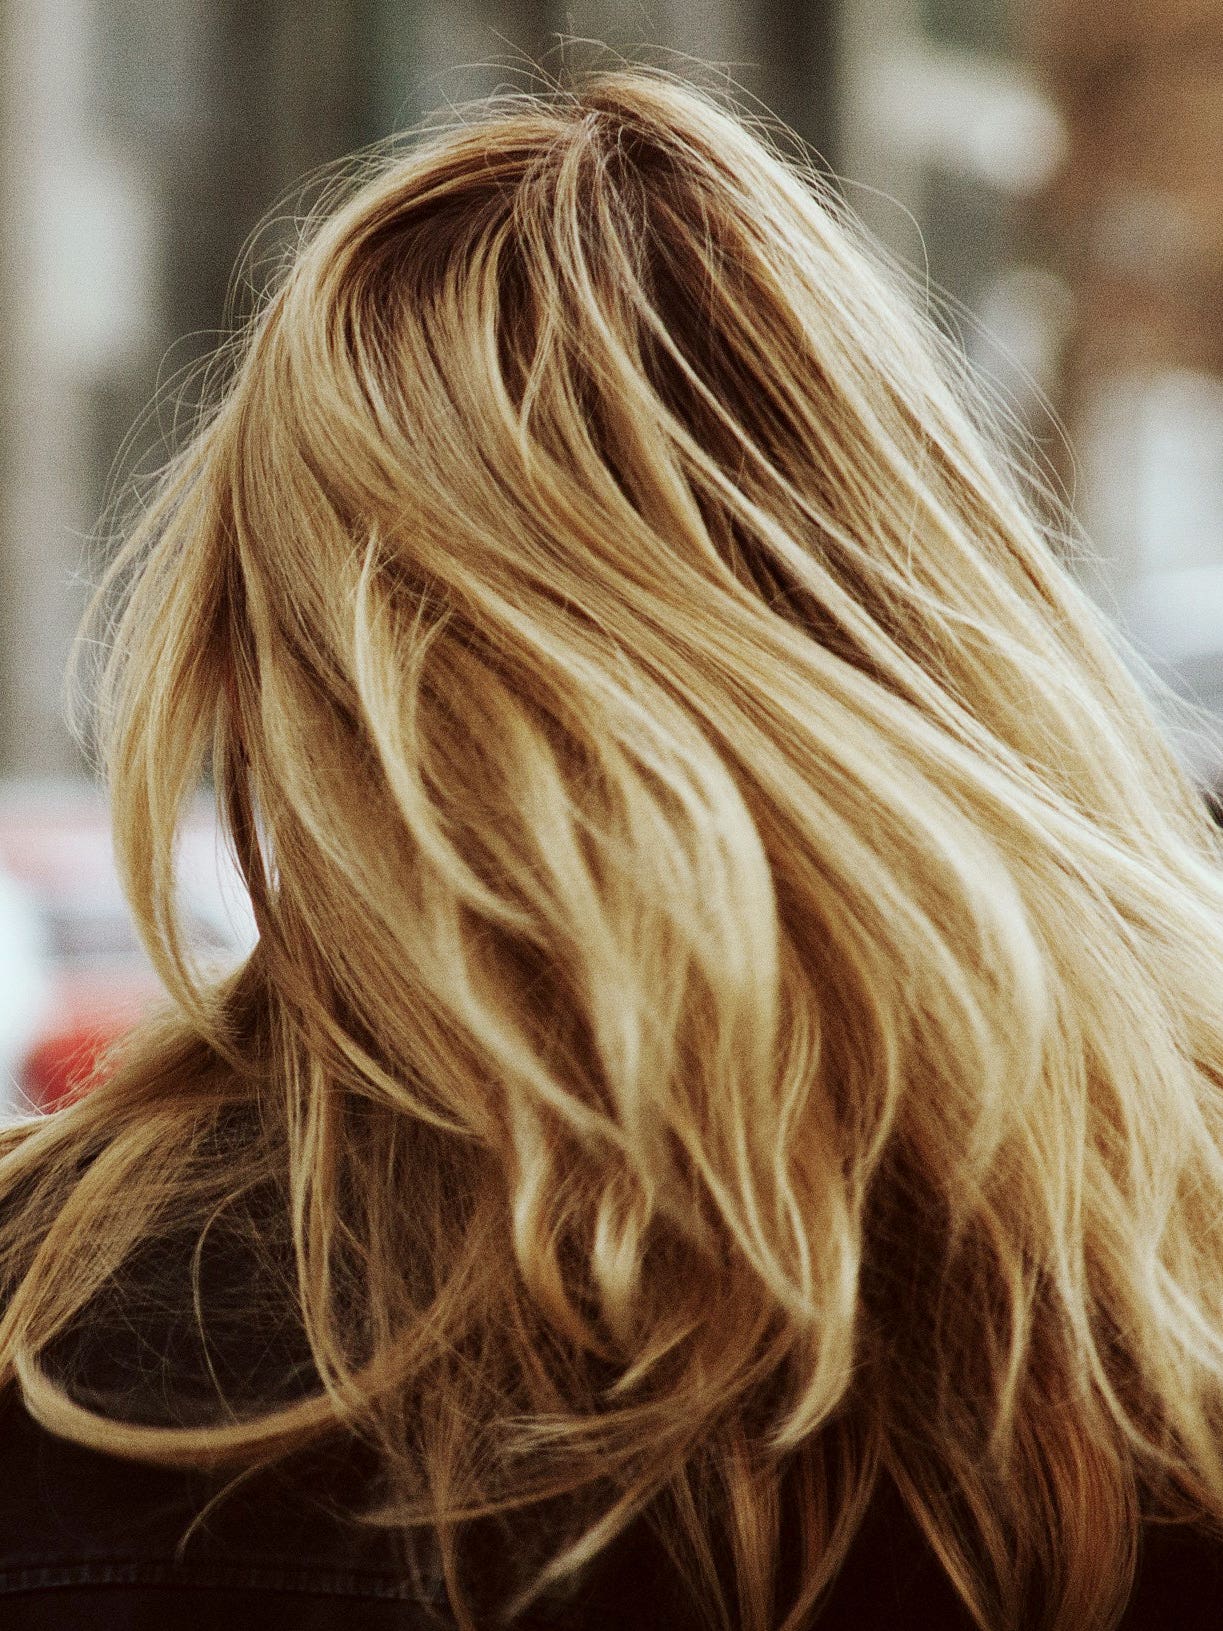 How to Lighten Your Hair Naturally (Even If You’re Not Blonde)